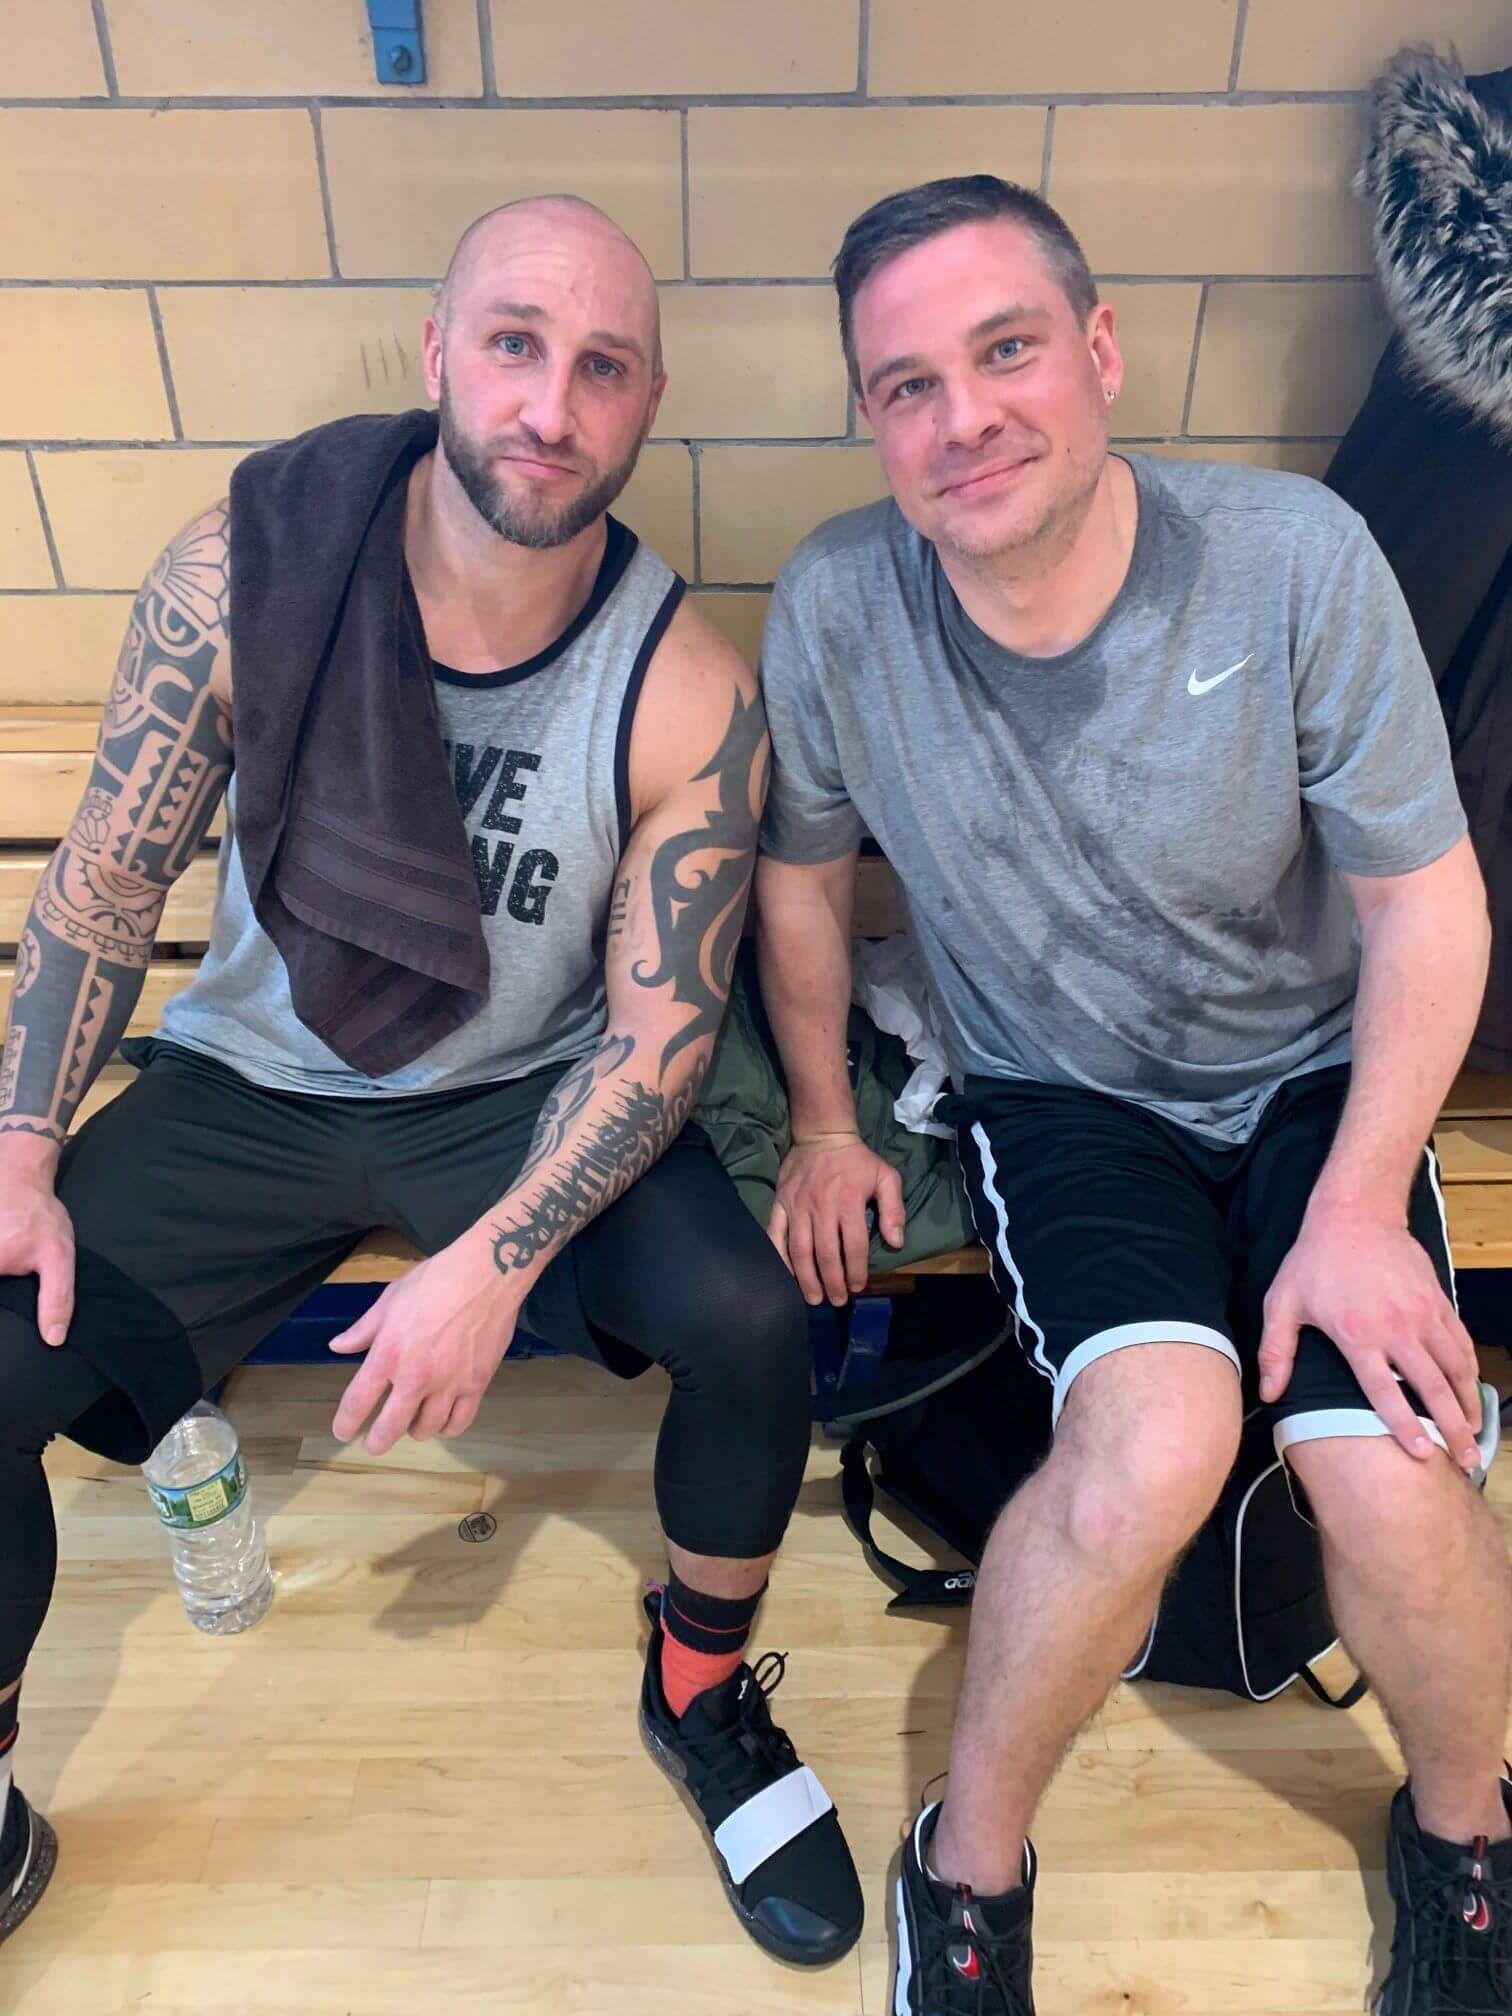 Jeff and Dennis top ballers